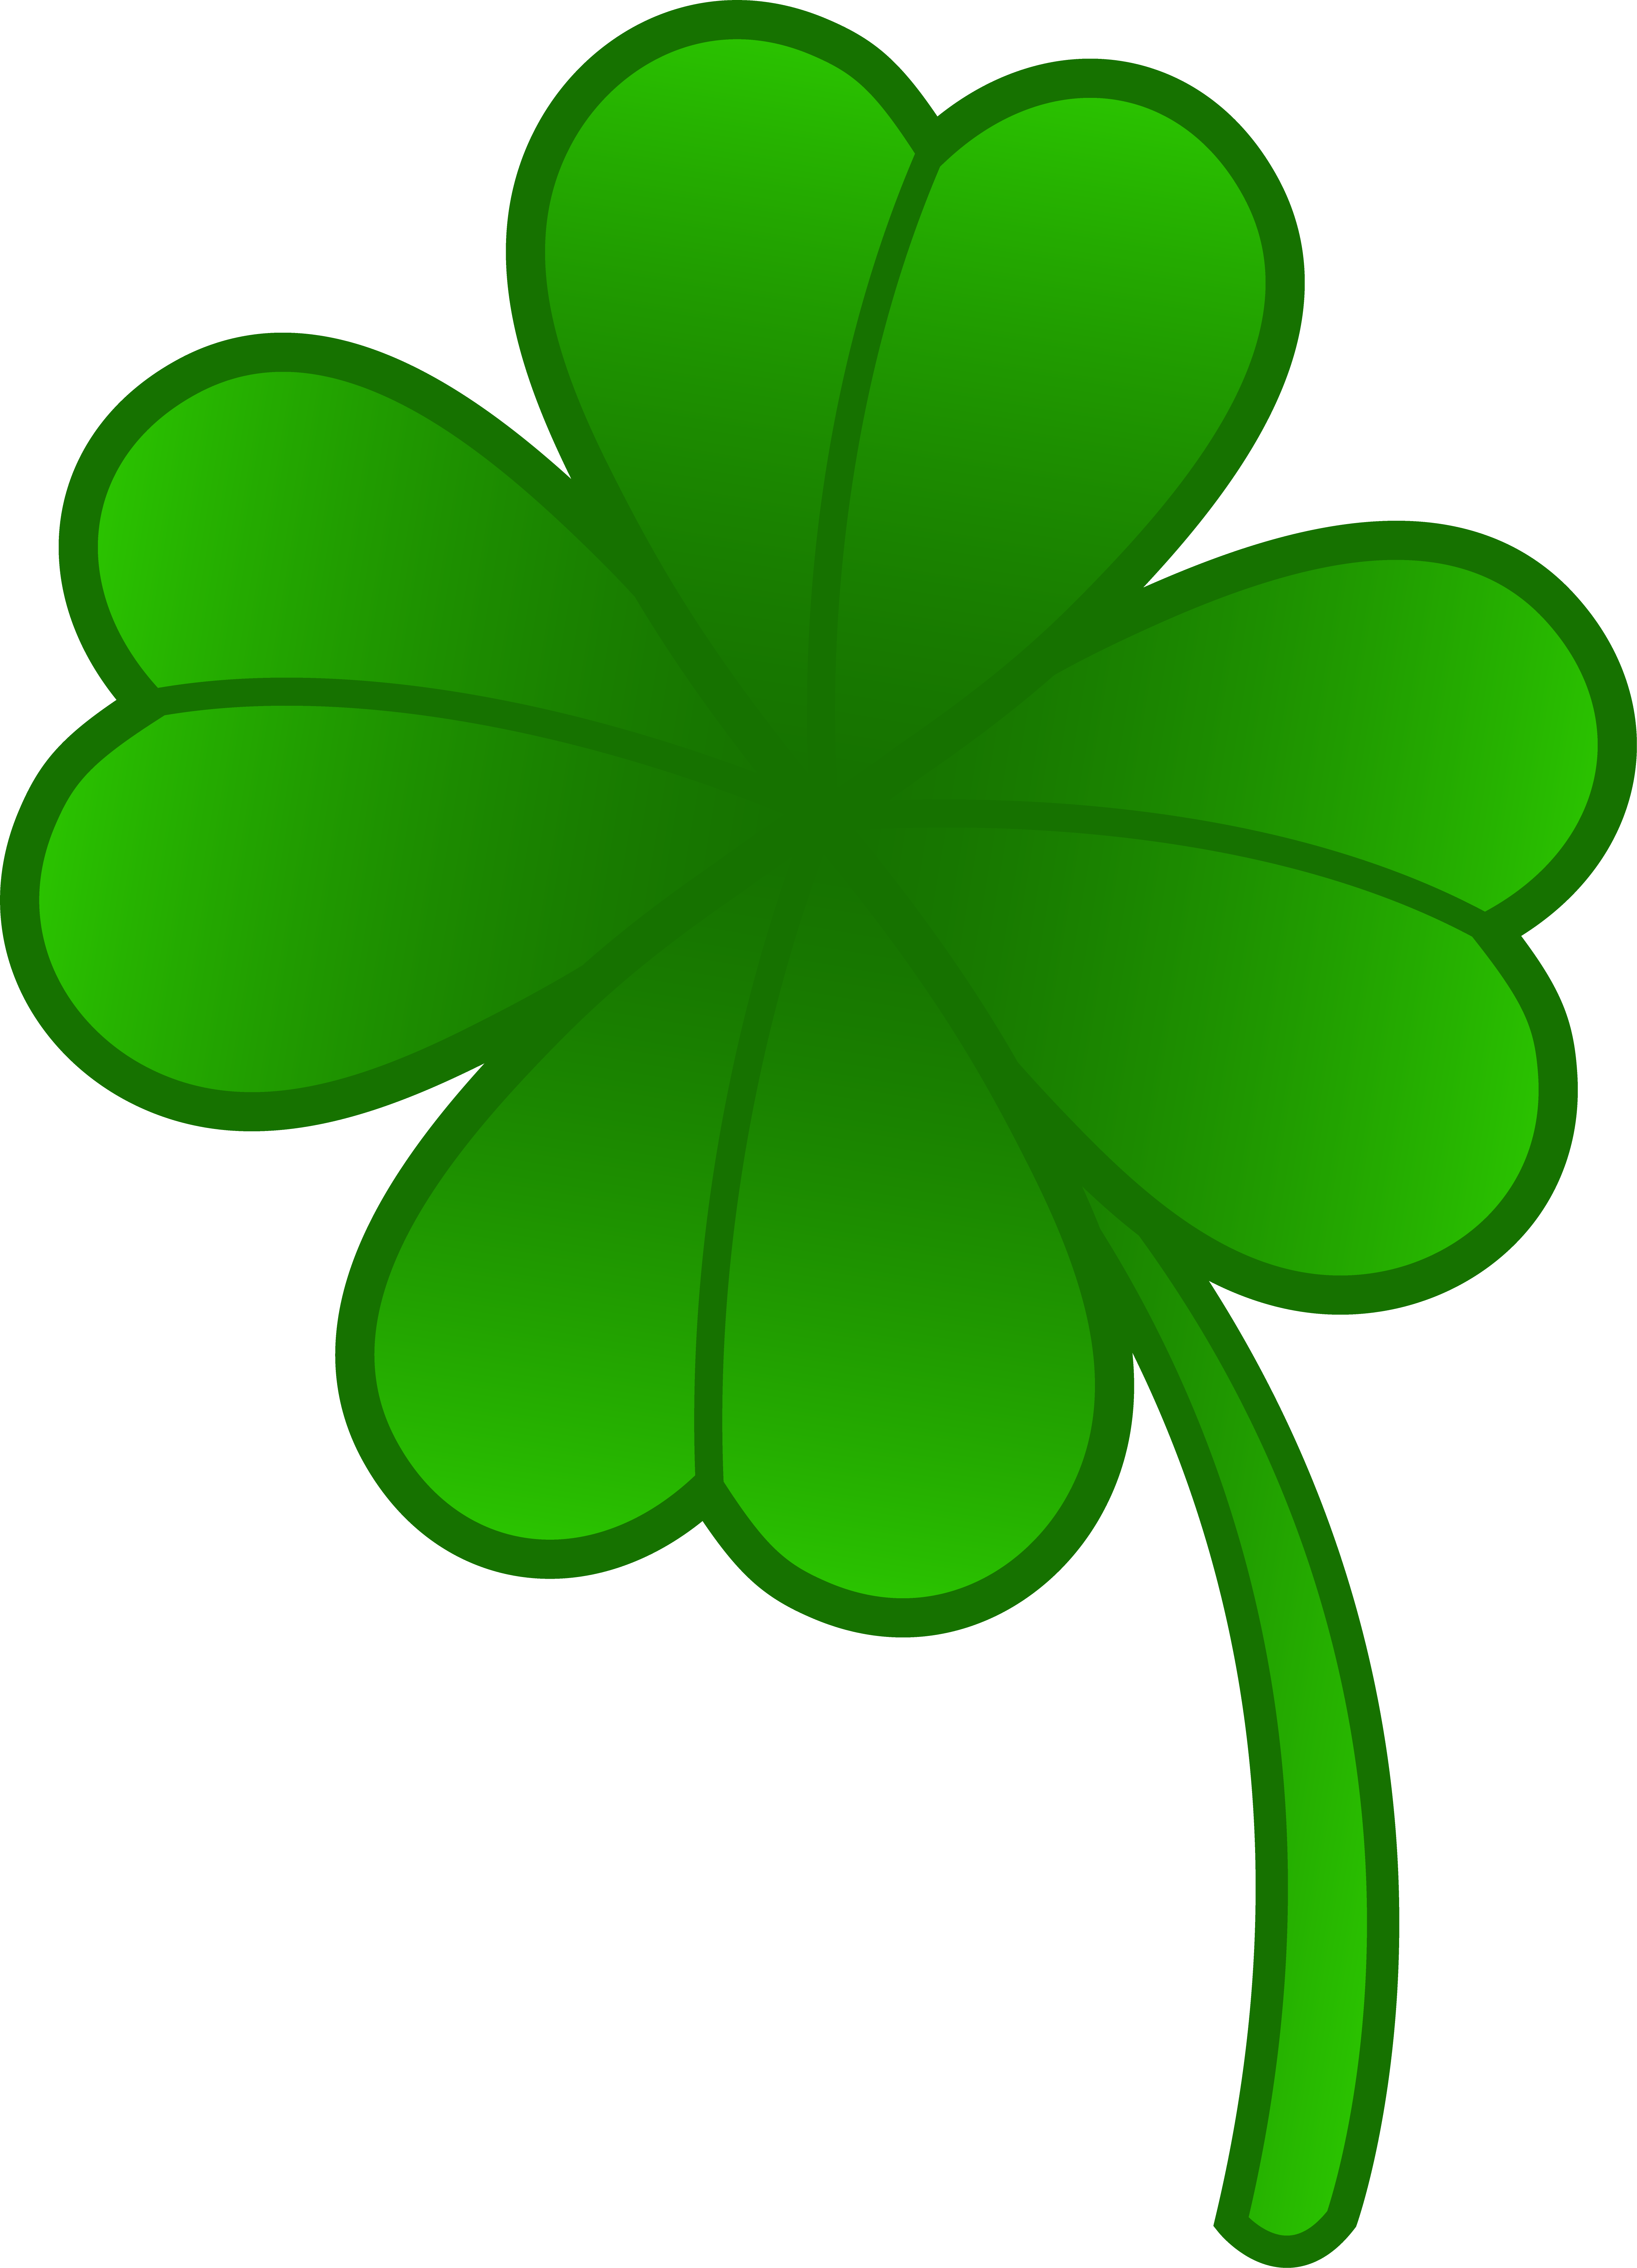 Use the Luck of the Irish to Drive Sales - Custom Label Tips and 